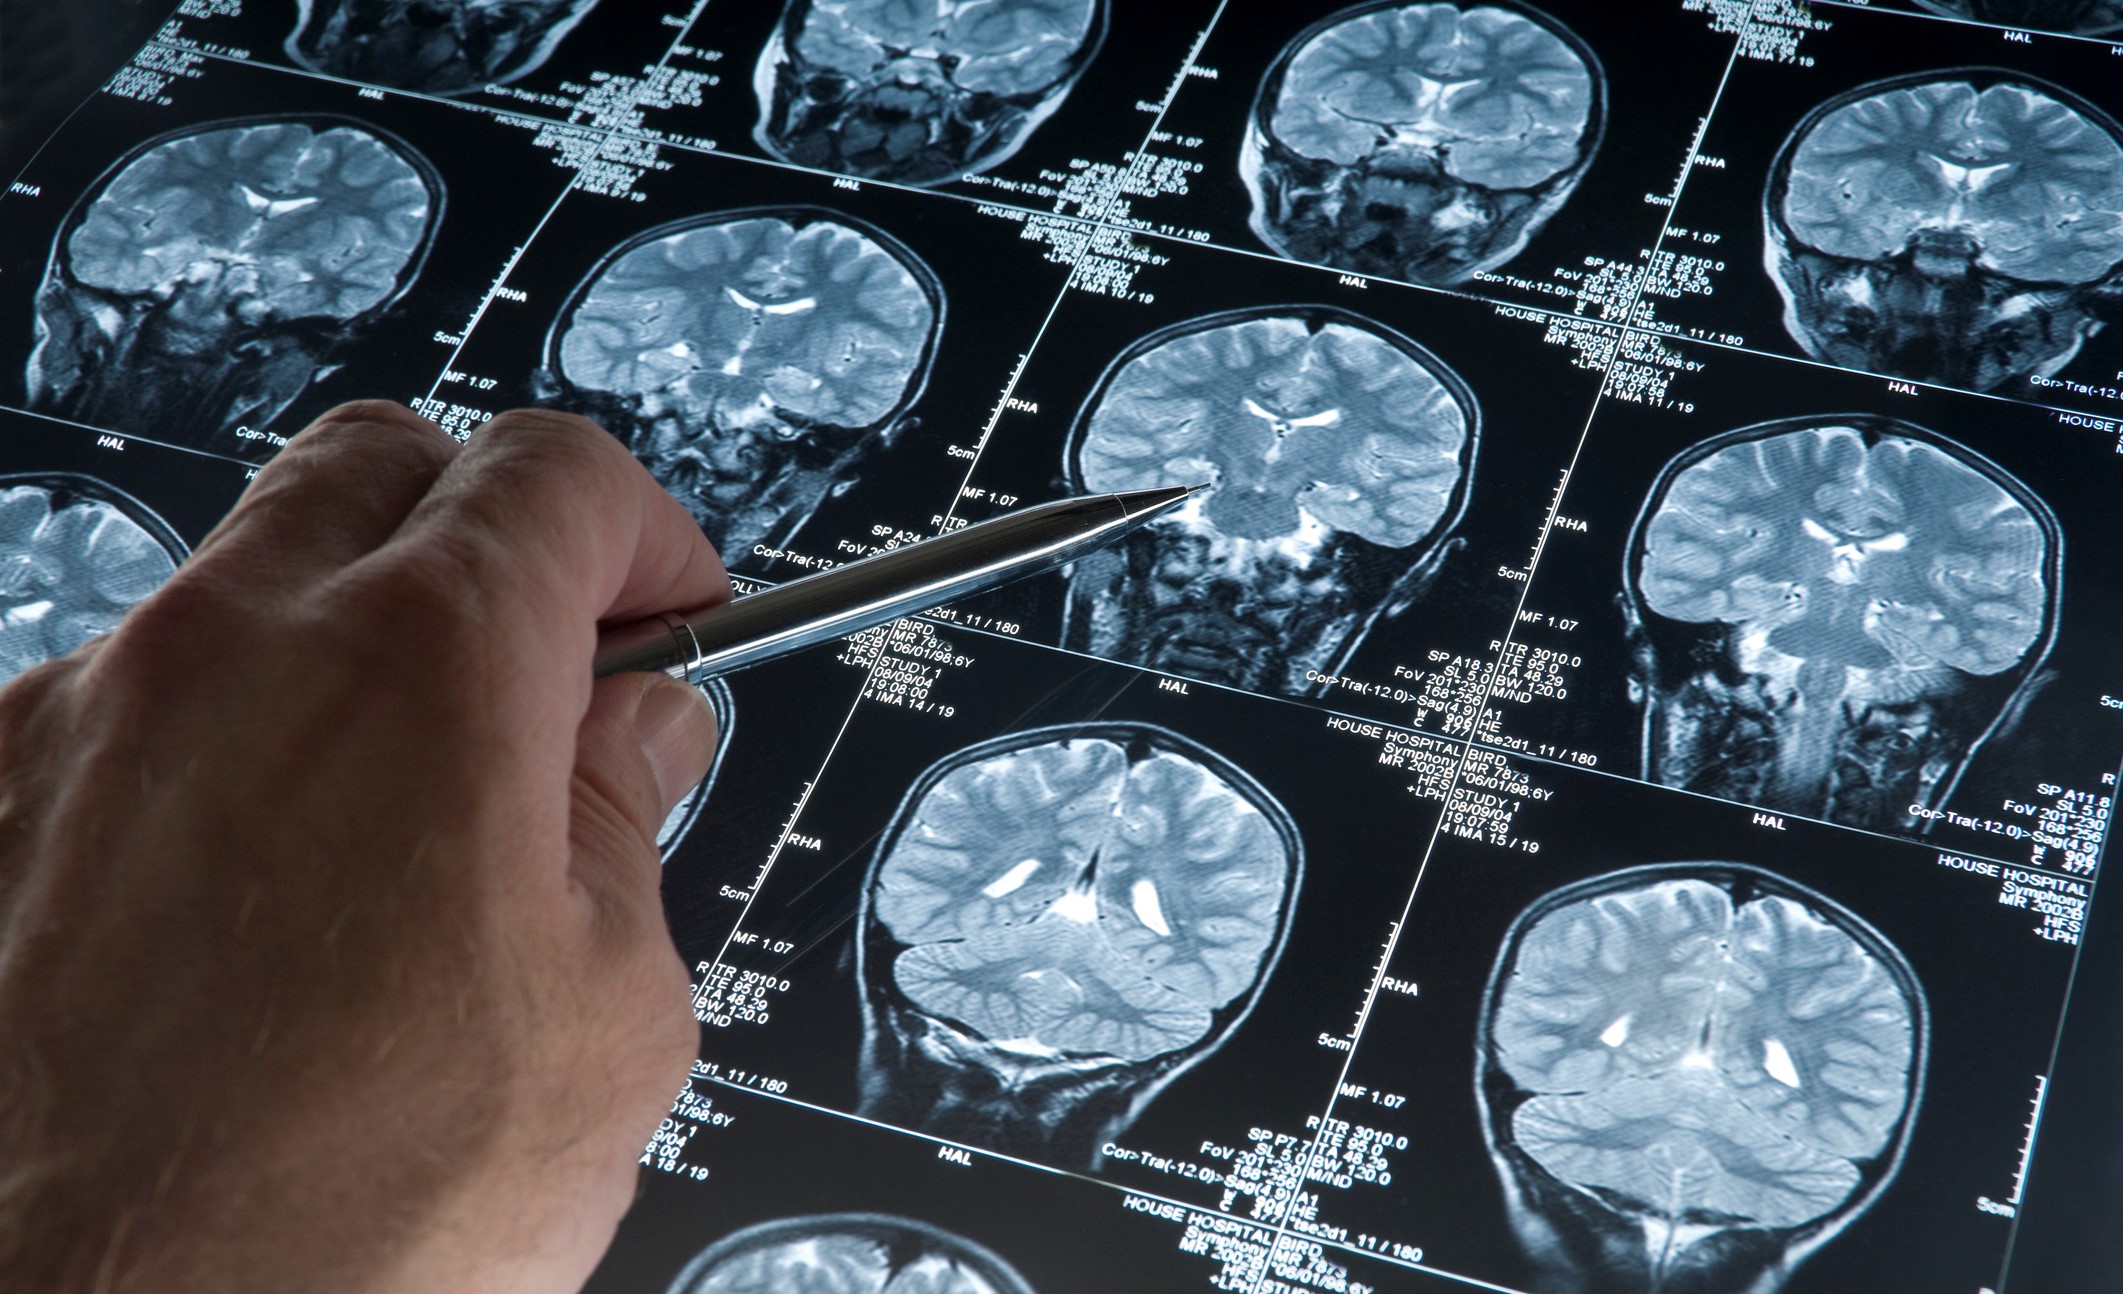 Person's hand holding a pen, pointing at a brain scan image